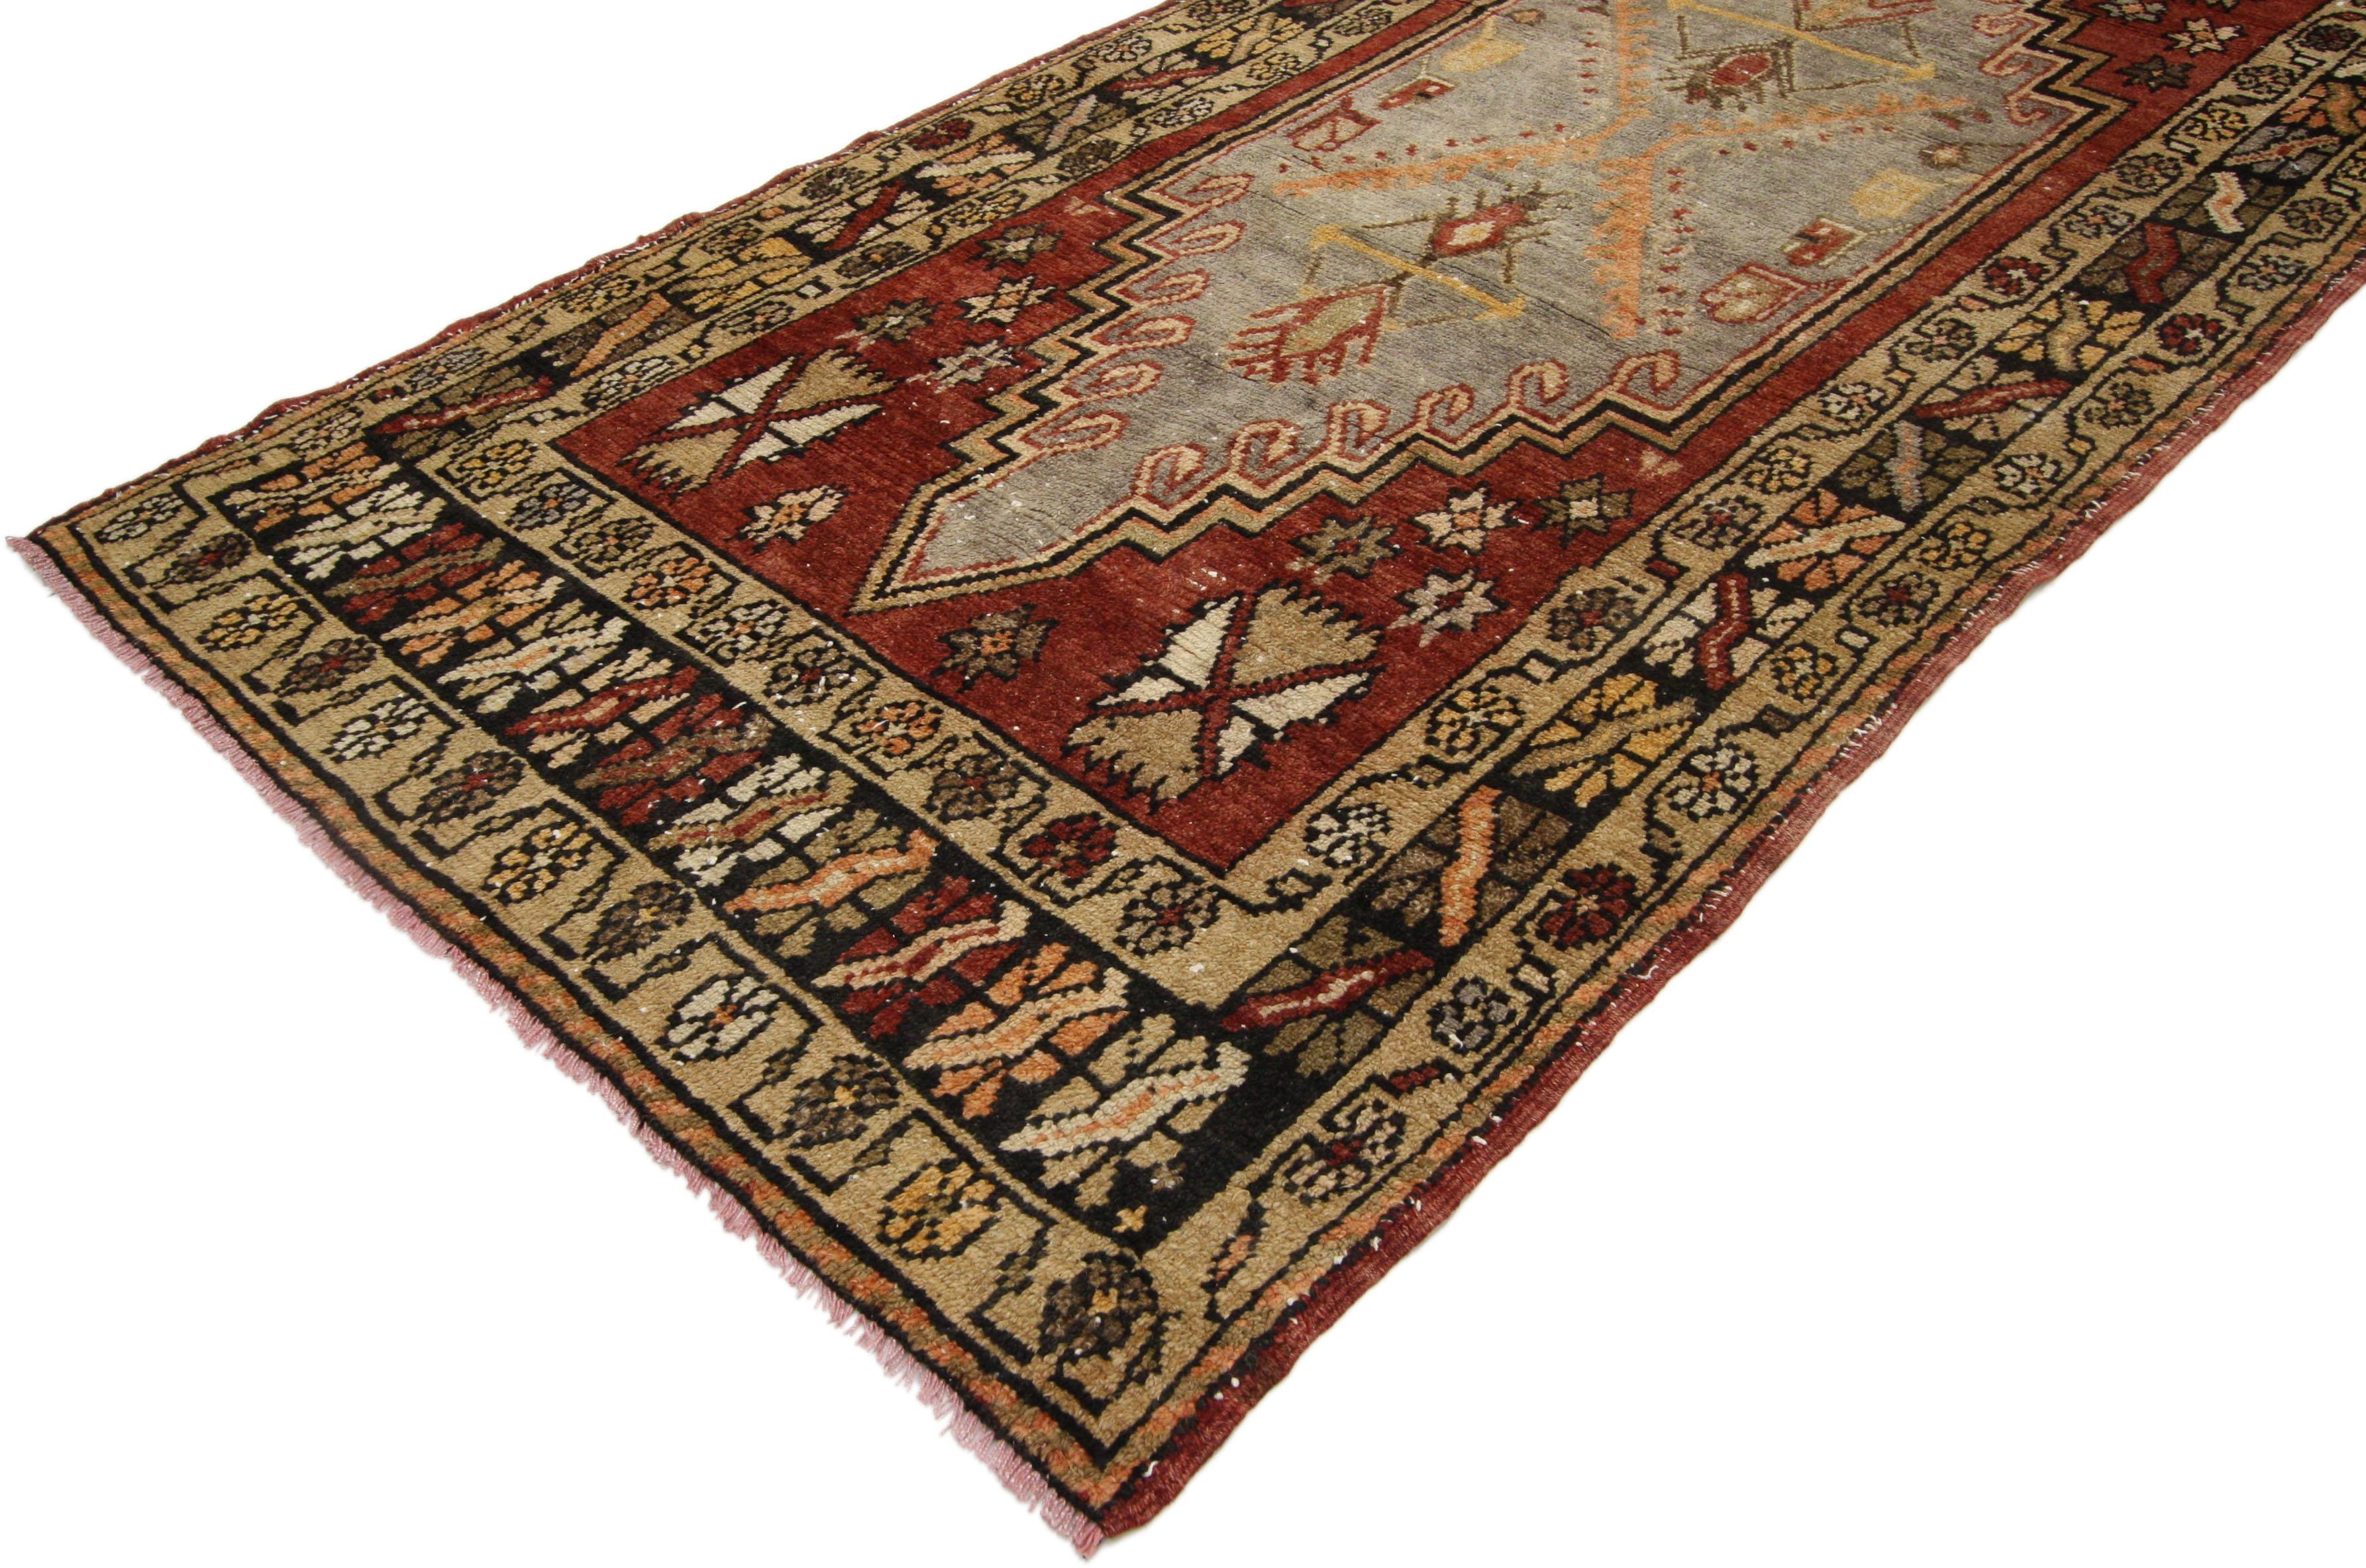 52405 Vintage Turkish Oushak Runner with Modern Artisan Rustic Style, Hallway Runner 03'04 x 09'06. This hand-knotted vintage Turkish Oushak runner features two large stepped hexagonal medallions with interior latch-hooks and floral motifs. The